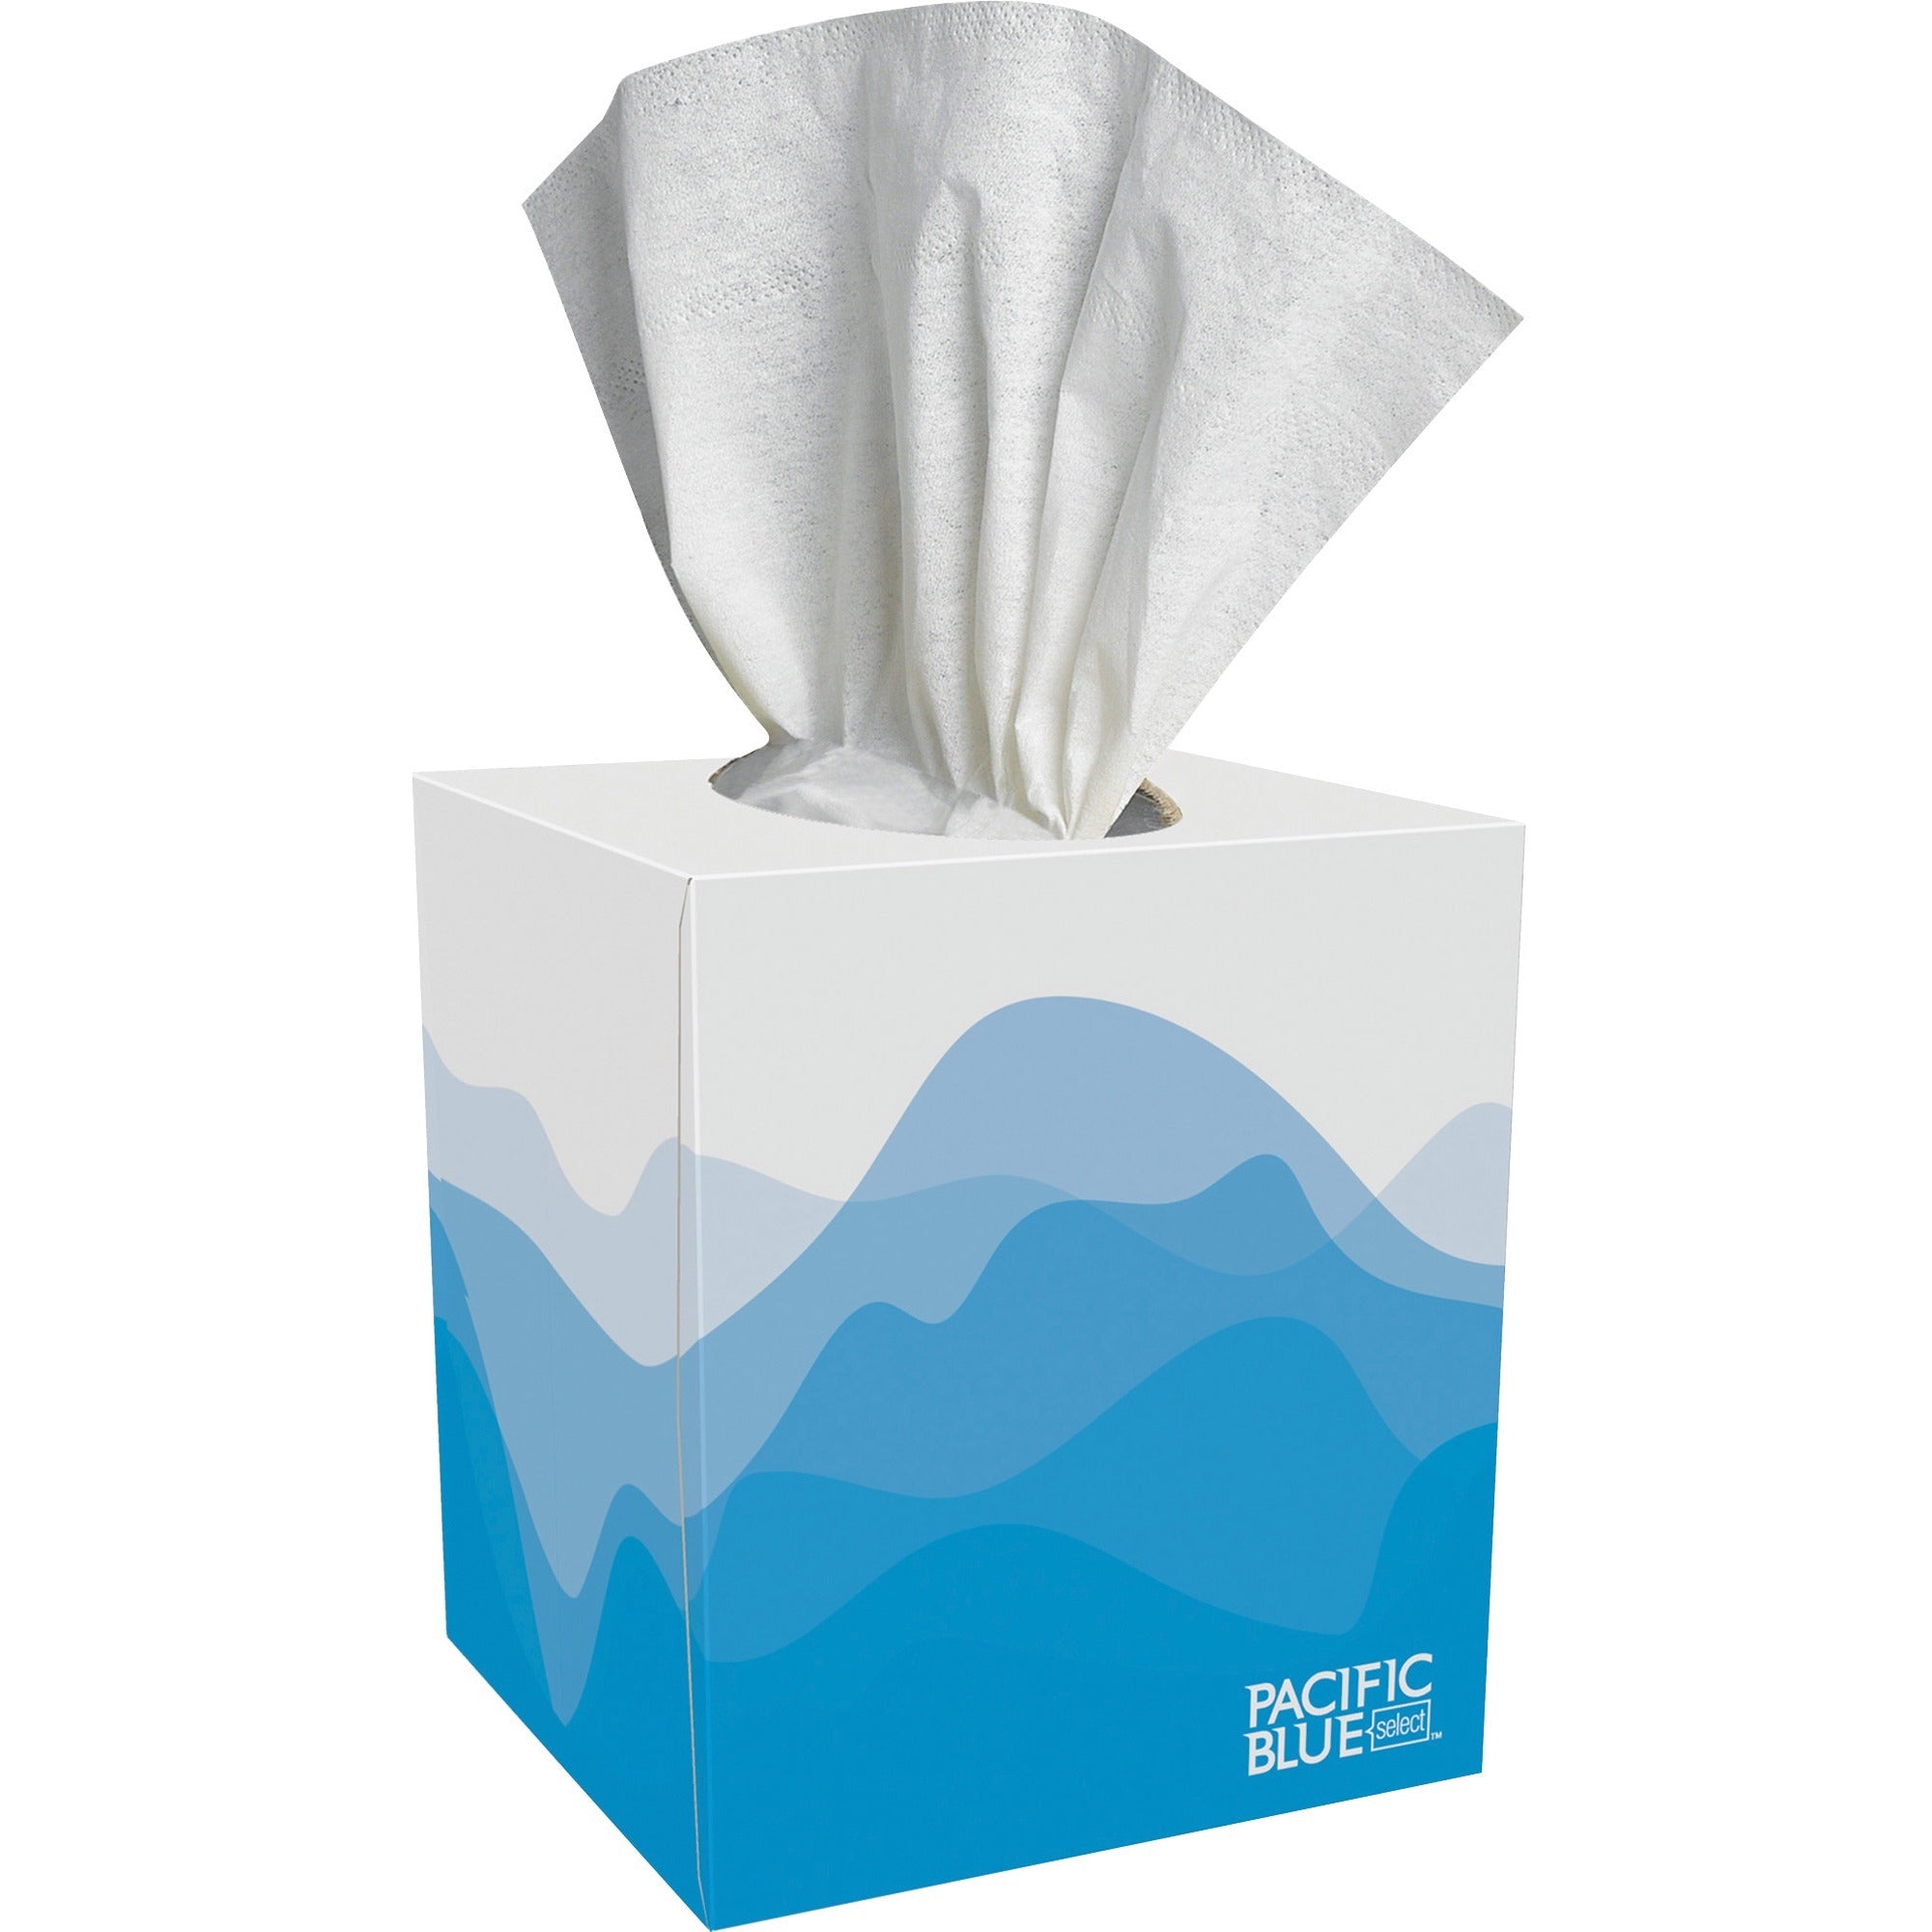 pacific-blue-select-facial-tissue-by-gp-pro-cube-box-2-ply-765-x-885-white-soft-absorbent-100-per-box-36-carton_gpc46200ct - 2